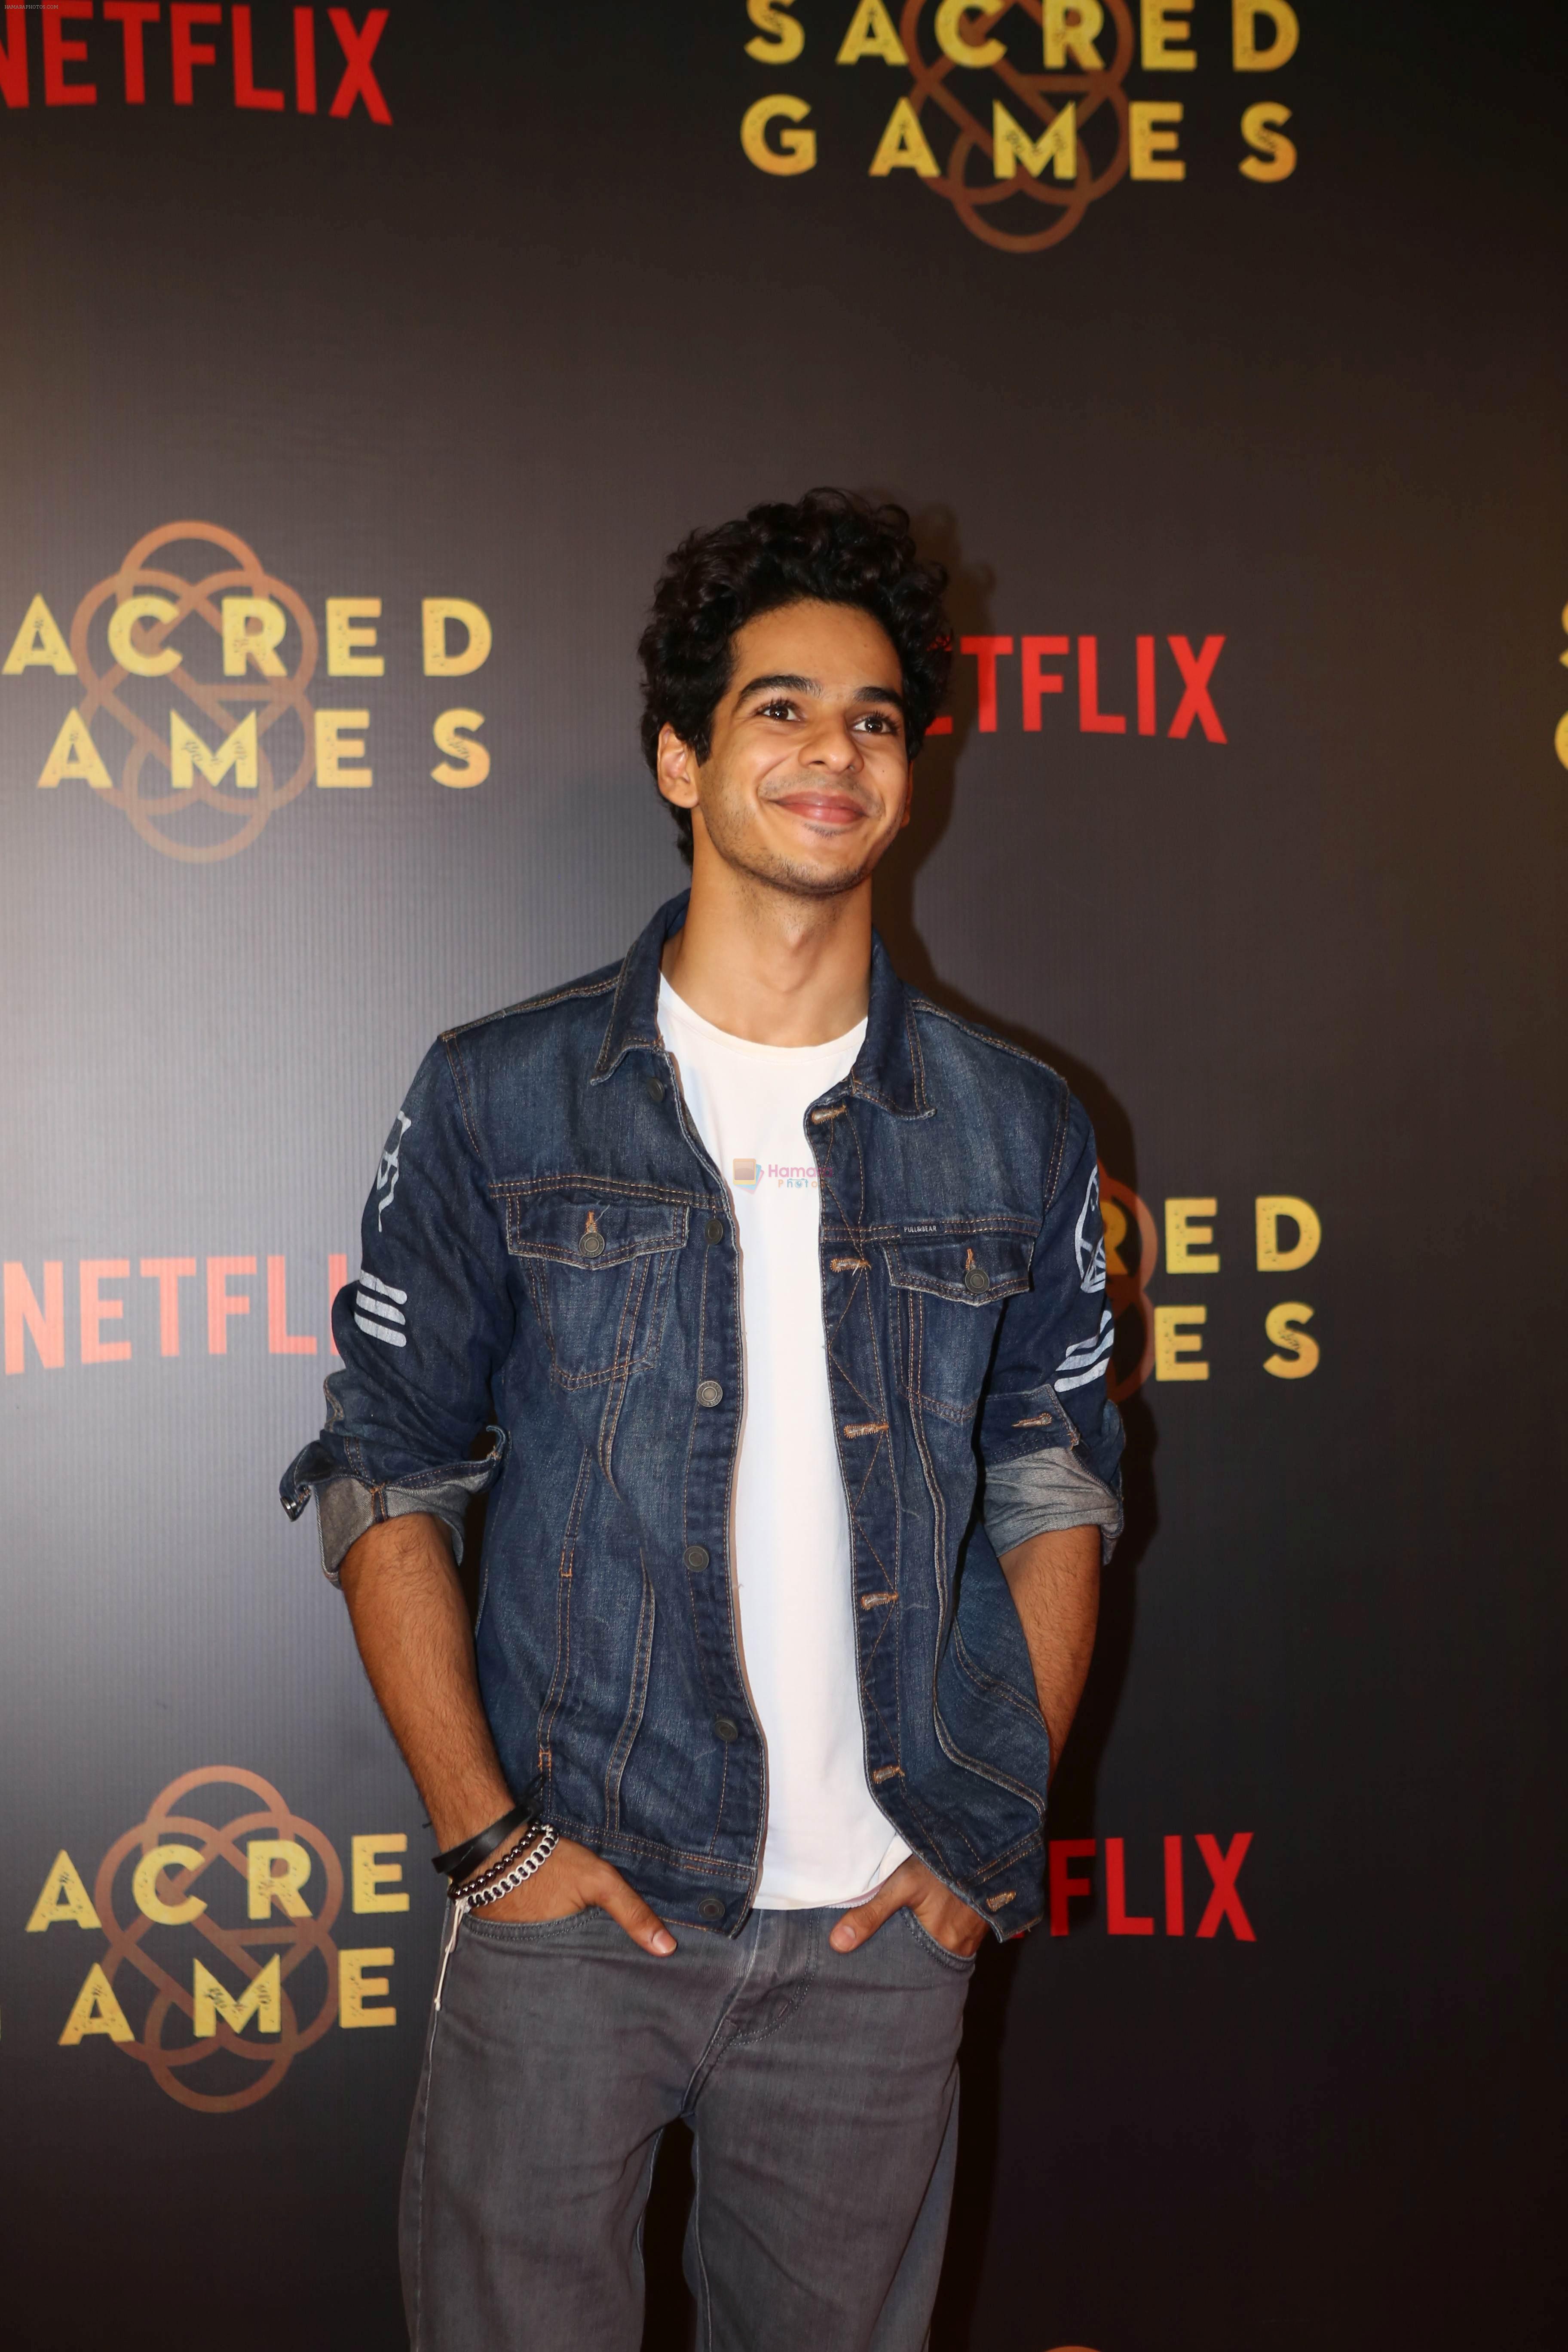 Ishaan Khattar at the Screening of Netflix Sacred Games in pvr icon Andheri on 28th June 2018